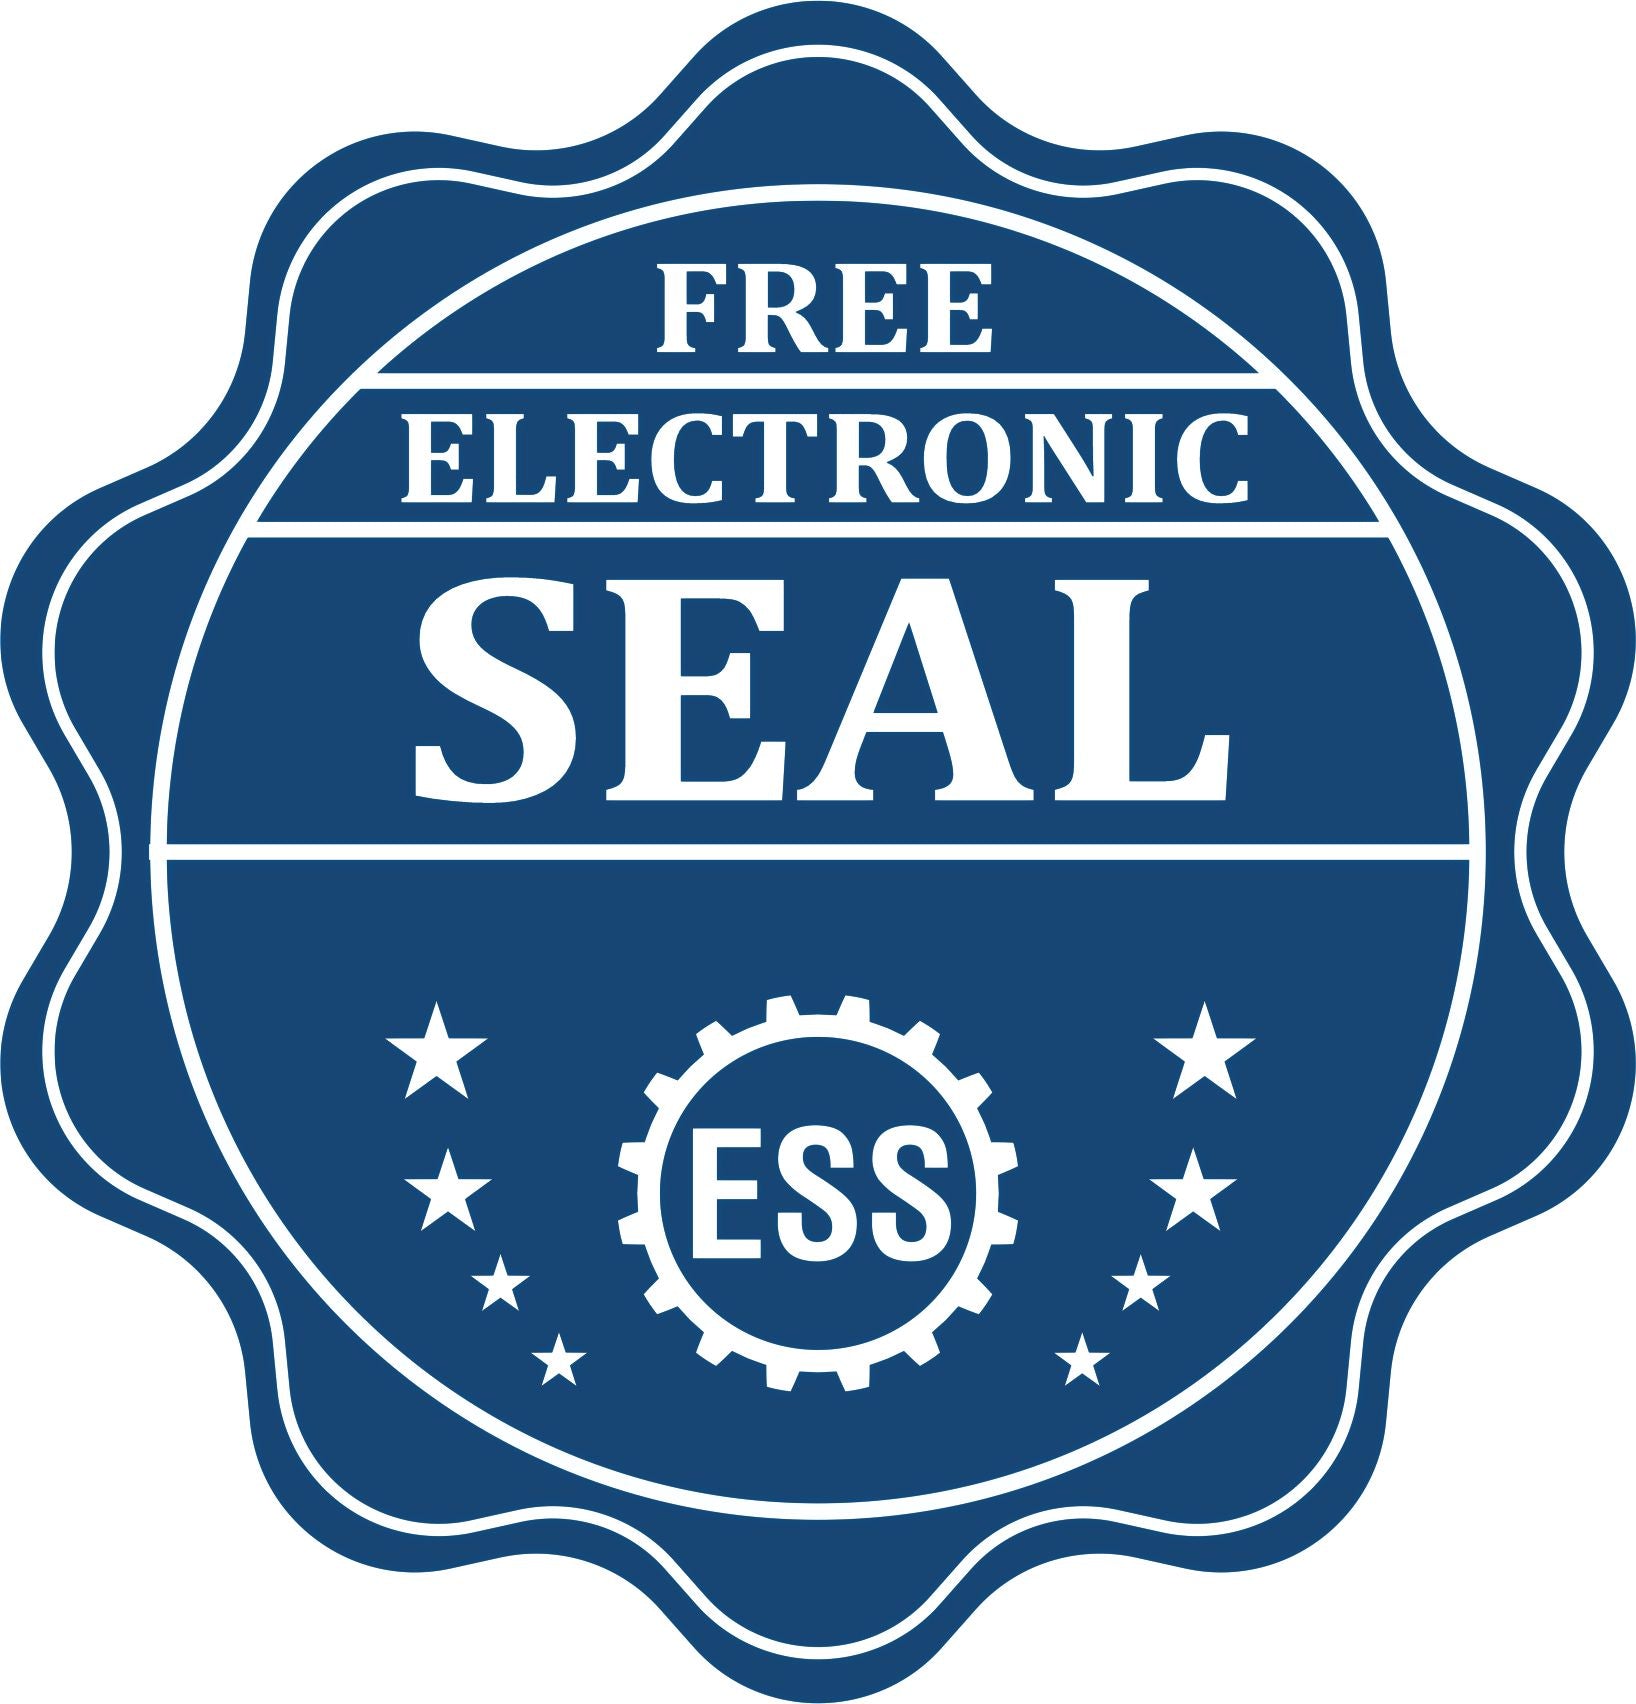 A badge showing a free electronic seal for the Handheld South Dakota Professional Engineer Embosser with stars and the ESS gear on the emblem.